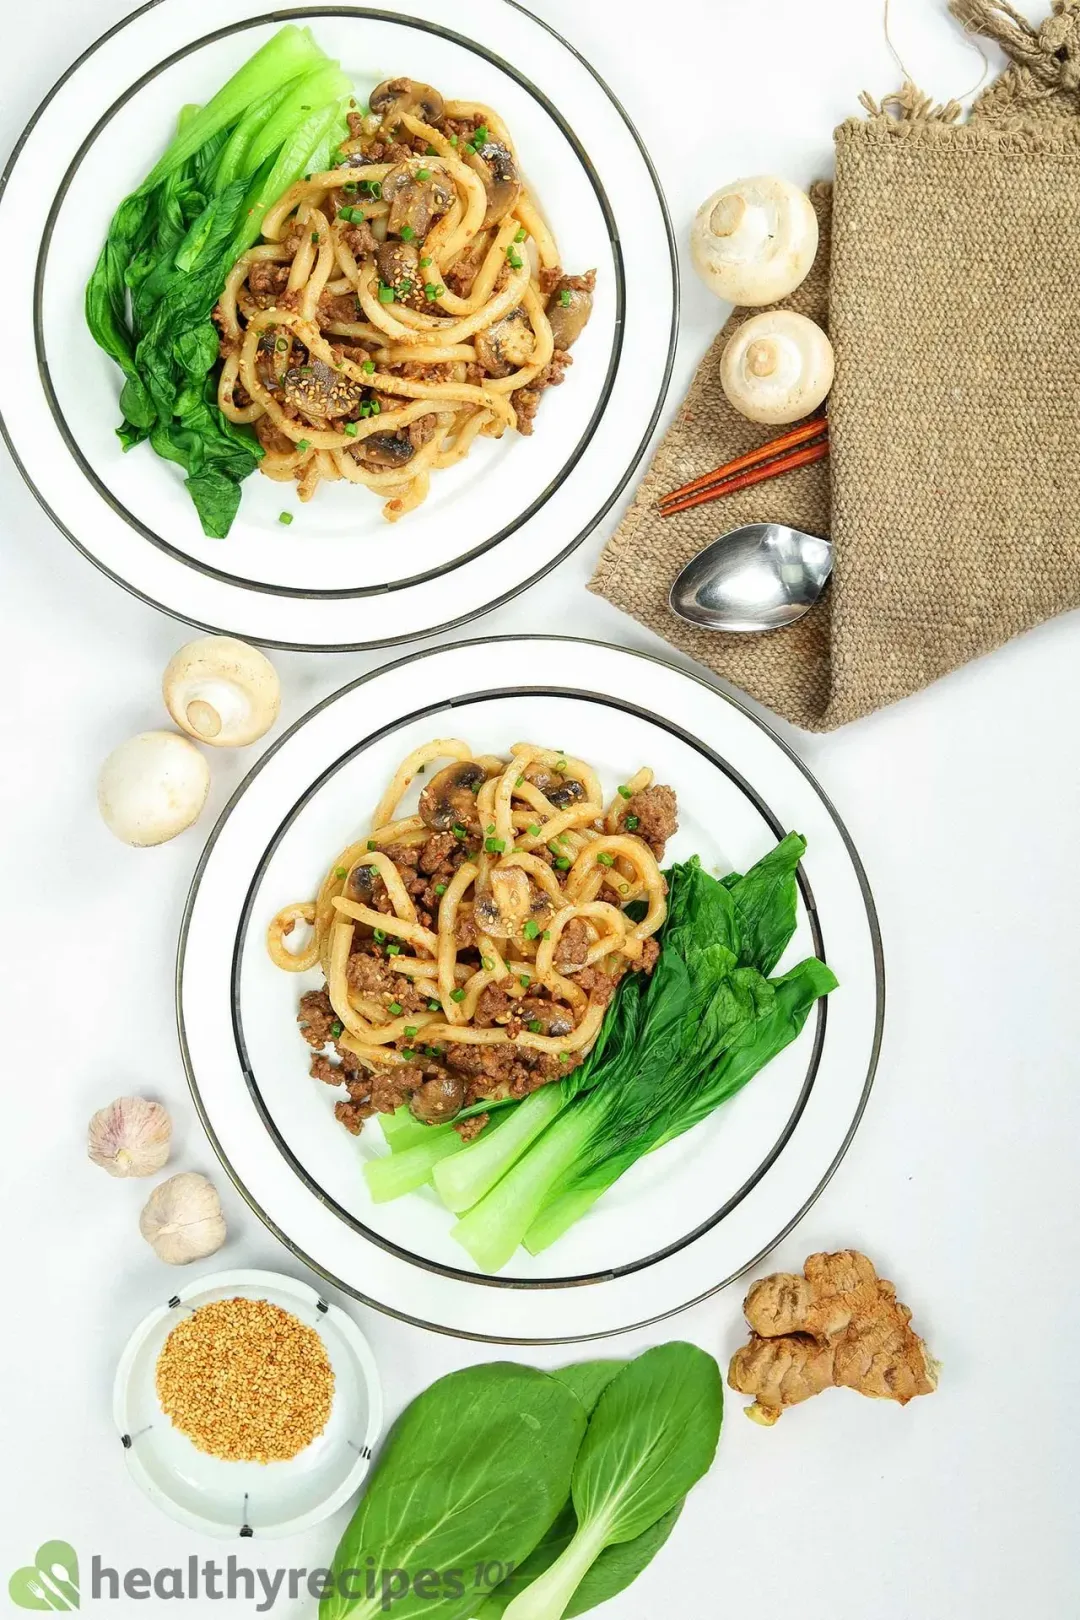 What to Serve With Asian Beef and Noodles